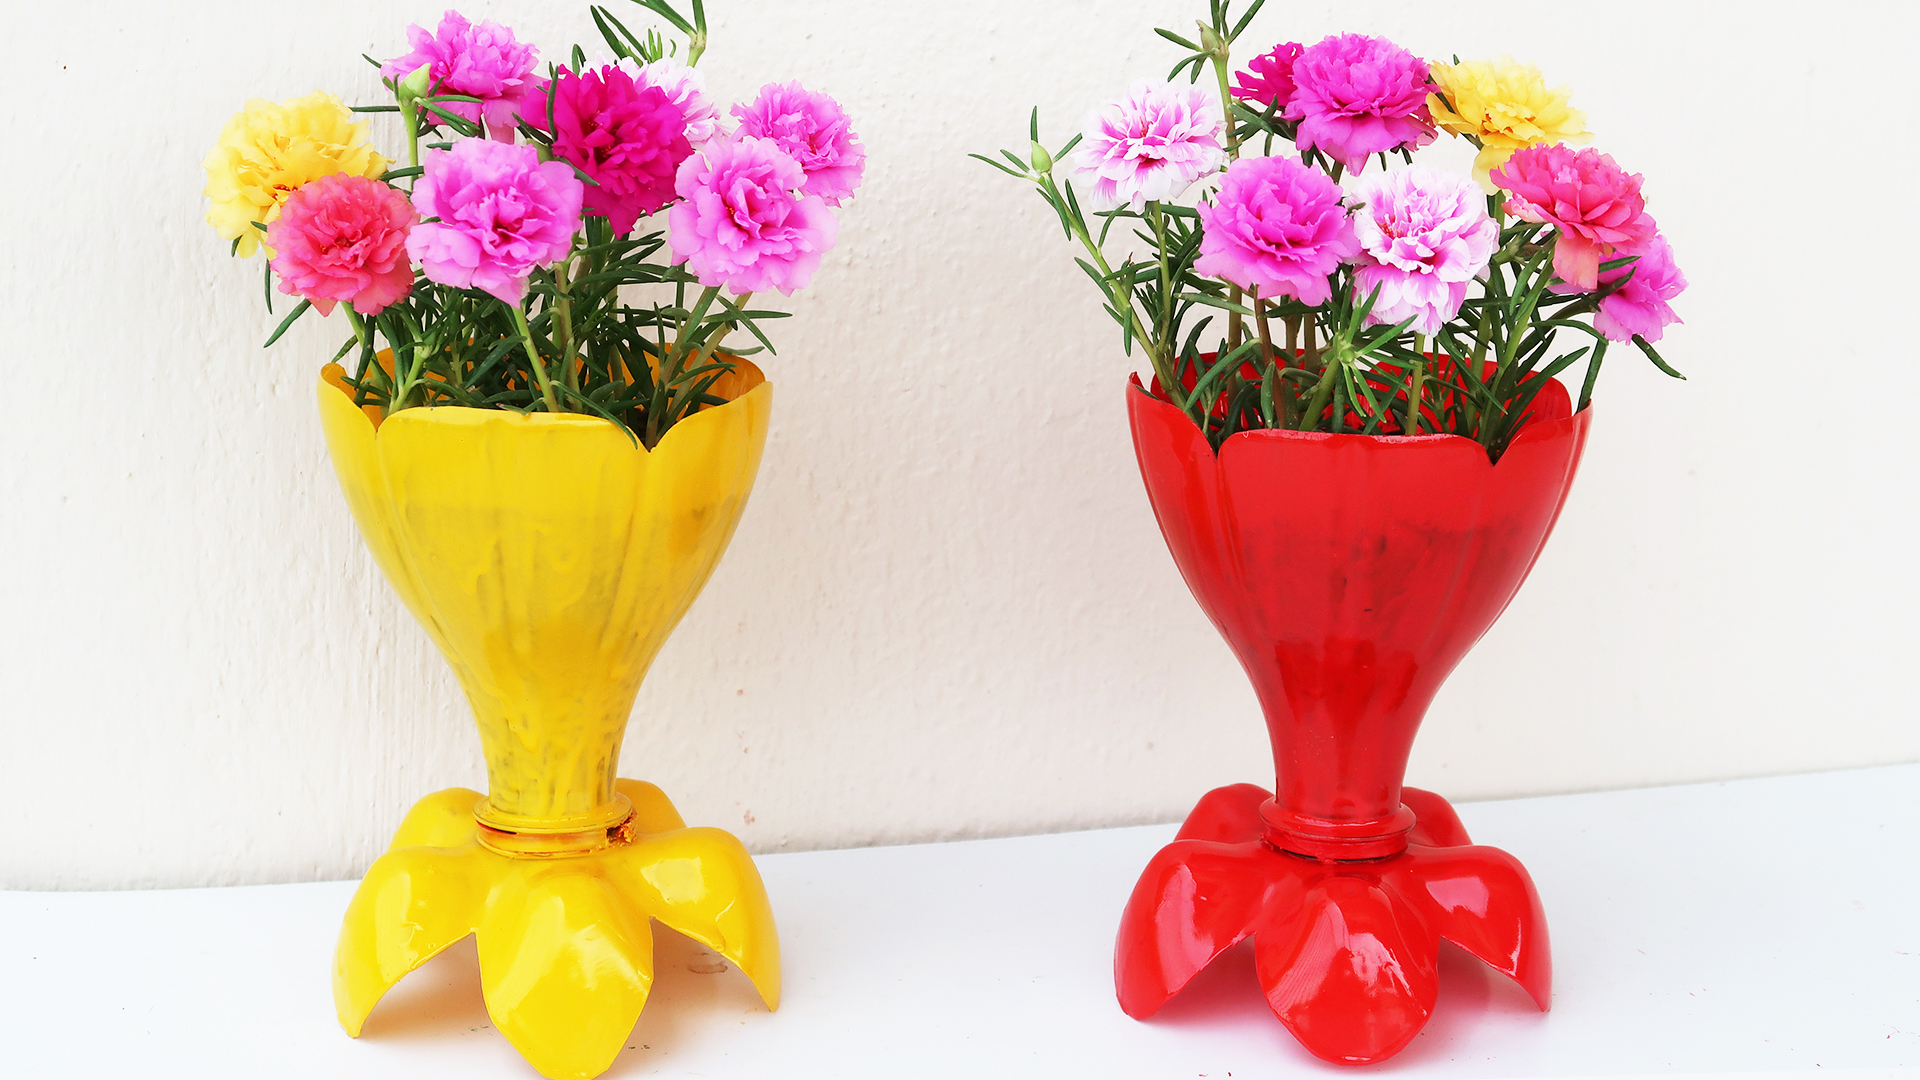 Creative Ideas, Beautiful Flower Pots Made From Discarded Plastic Bottles